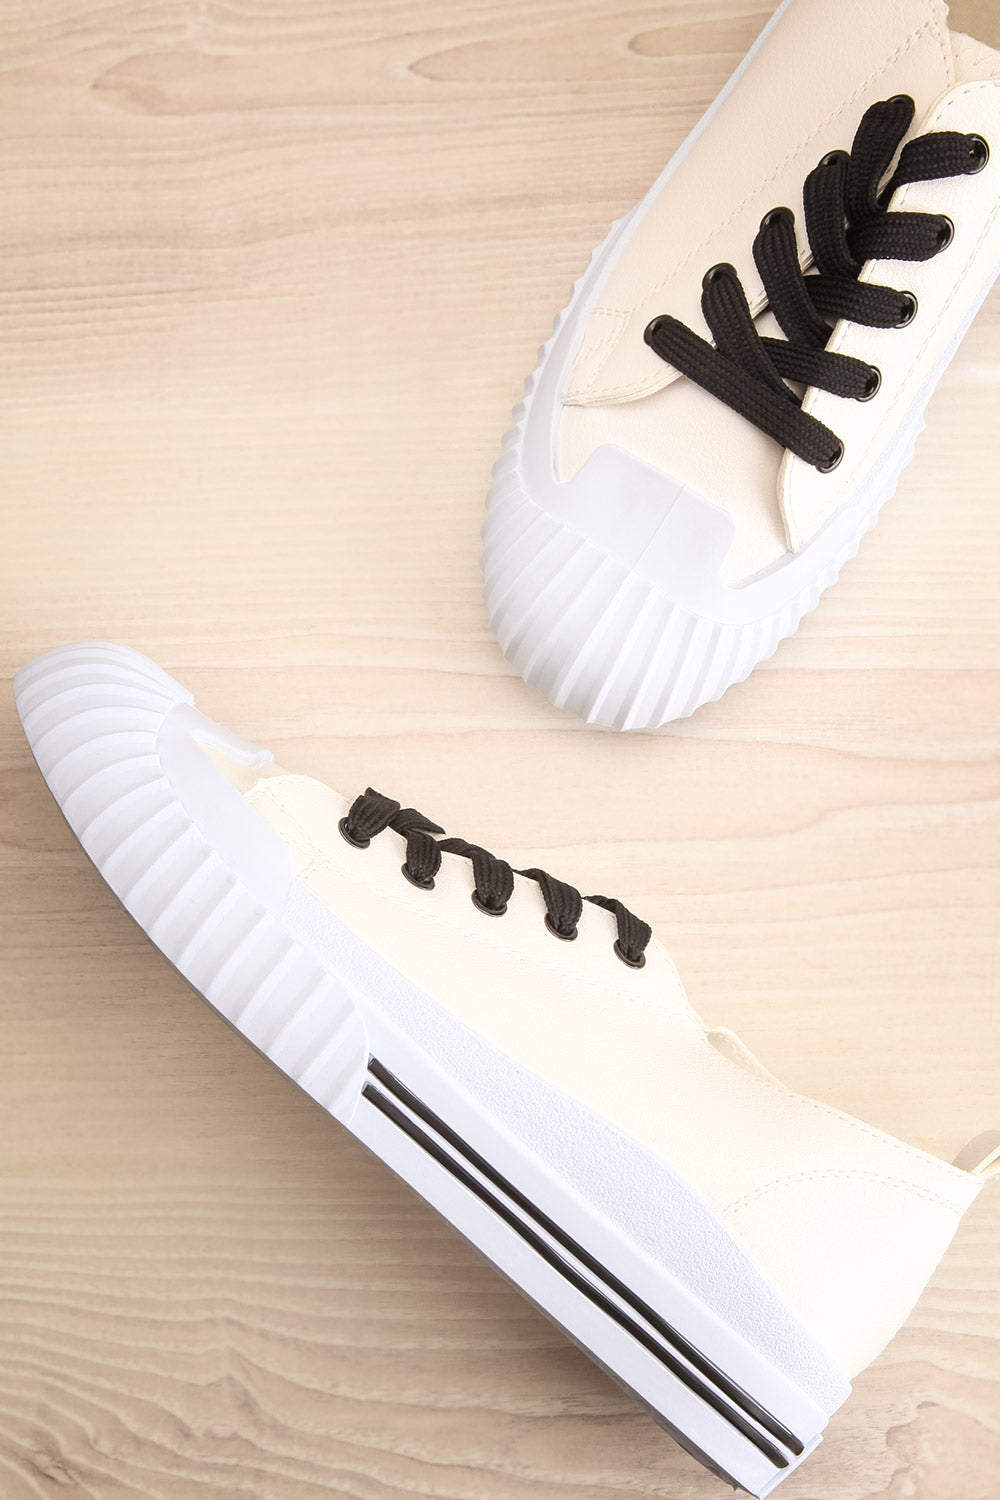 white canvas lace up sneakers